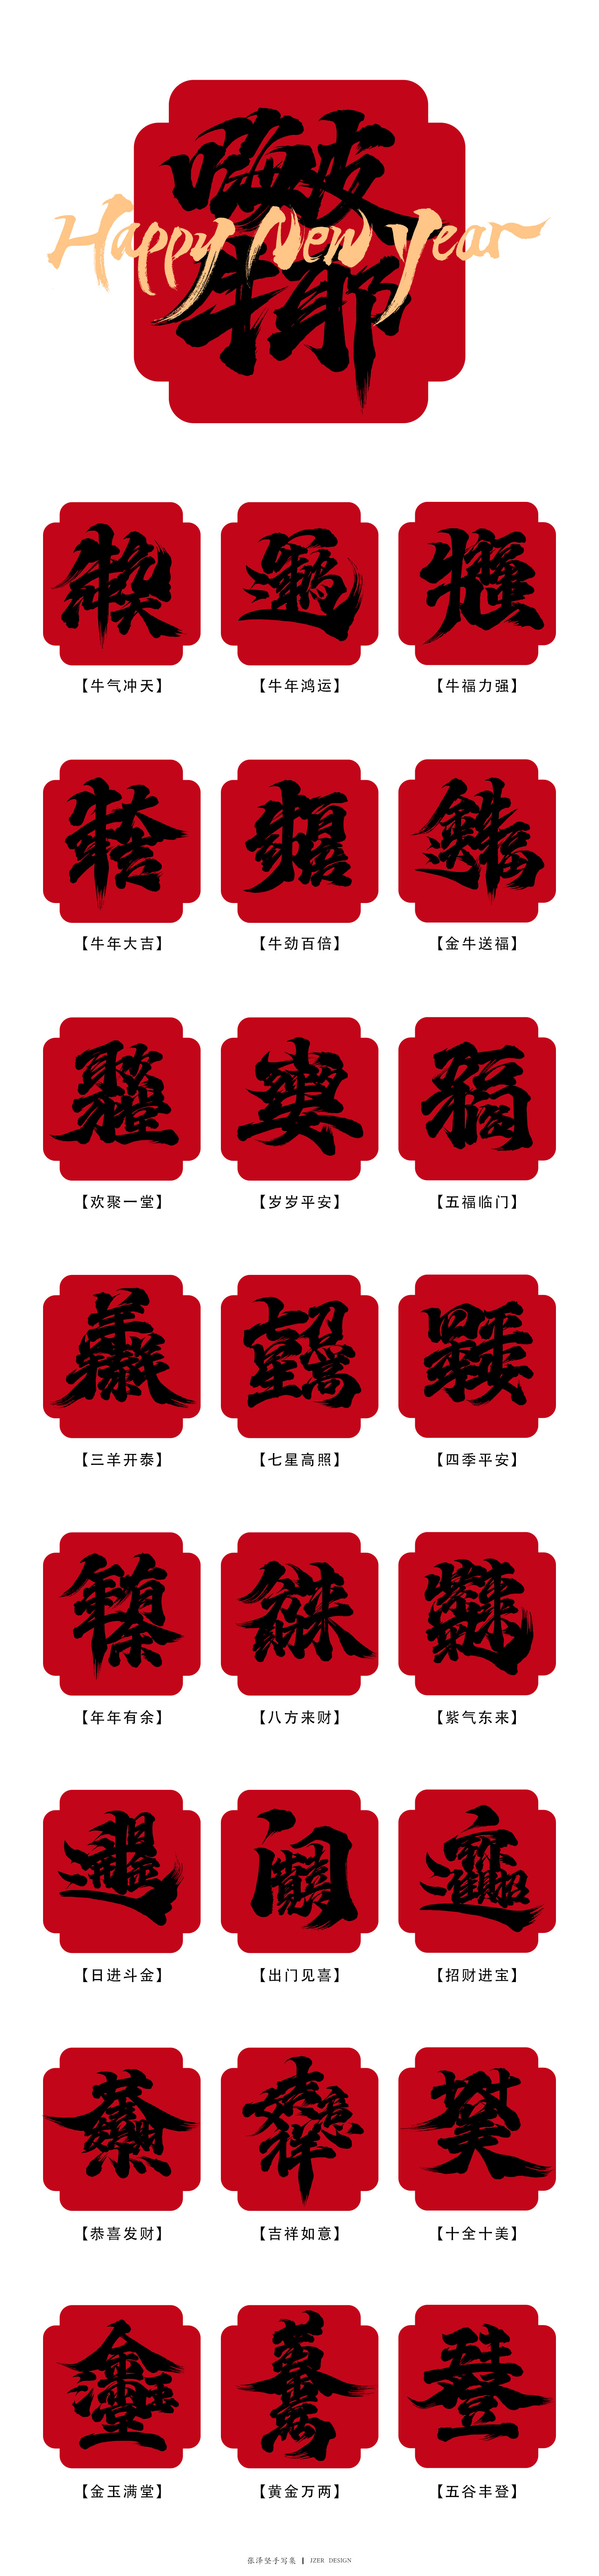 Common New Year greetings in Chinese characters